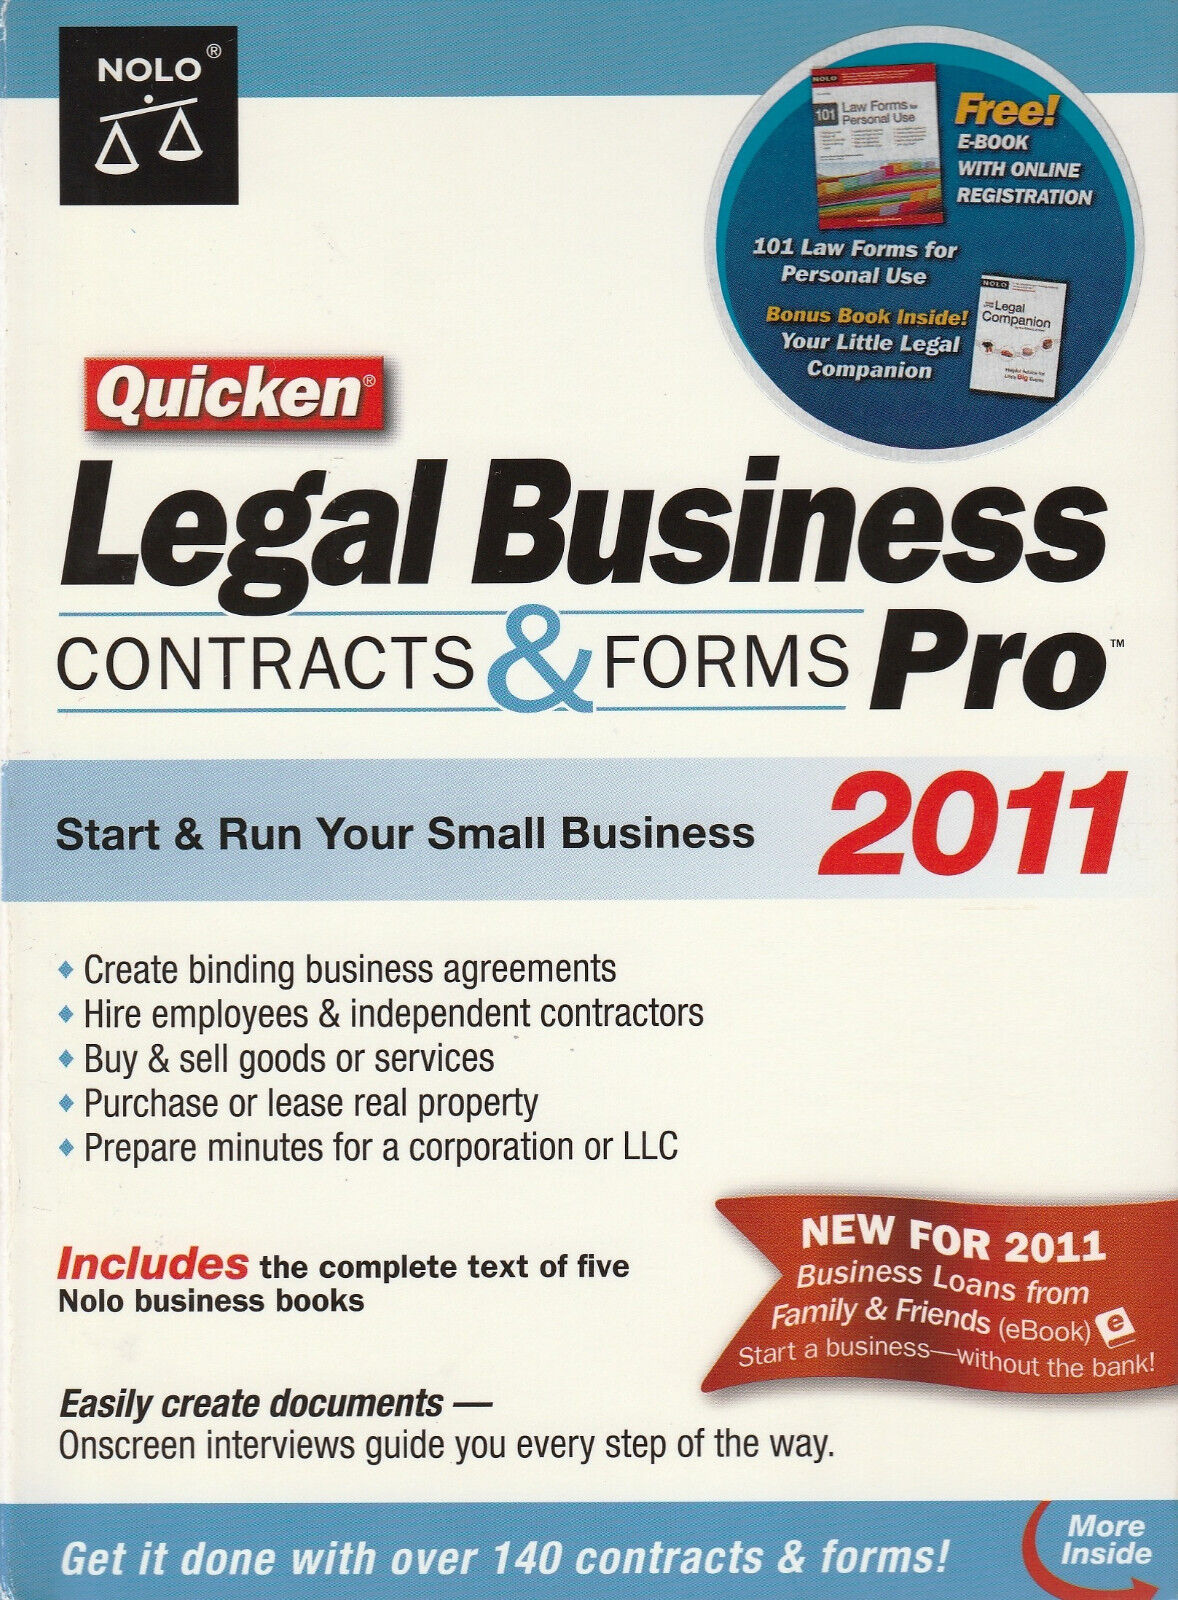 Quicken Legal Business Contracts & Forms Pro 2011